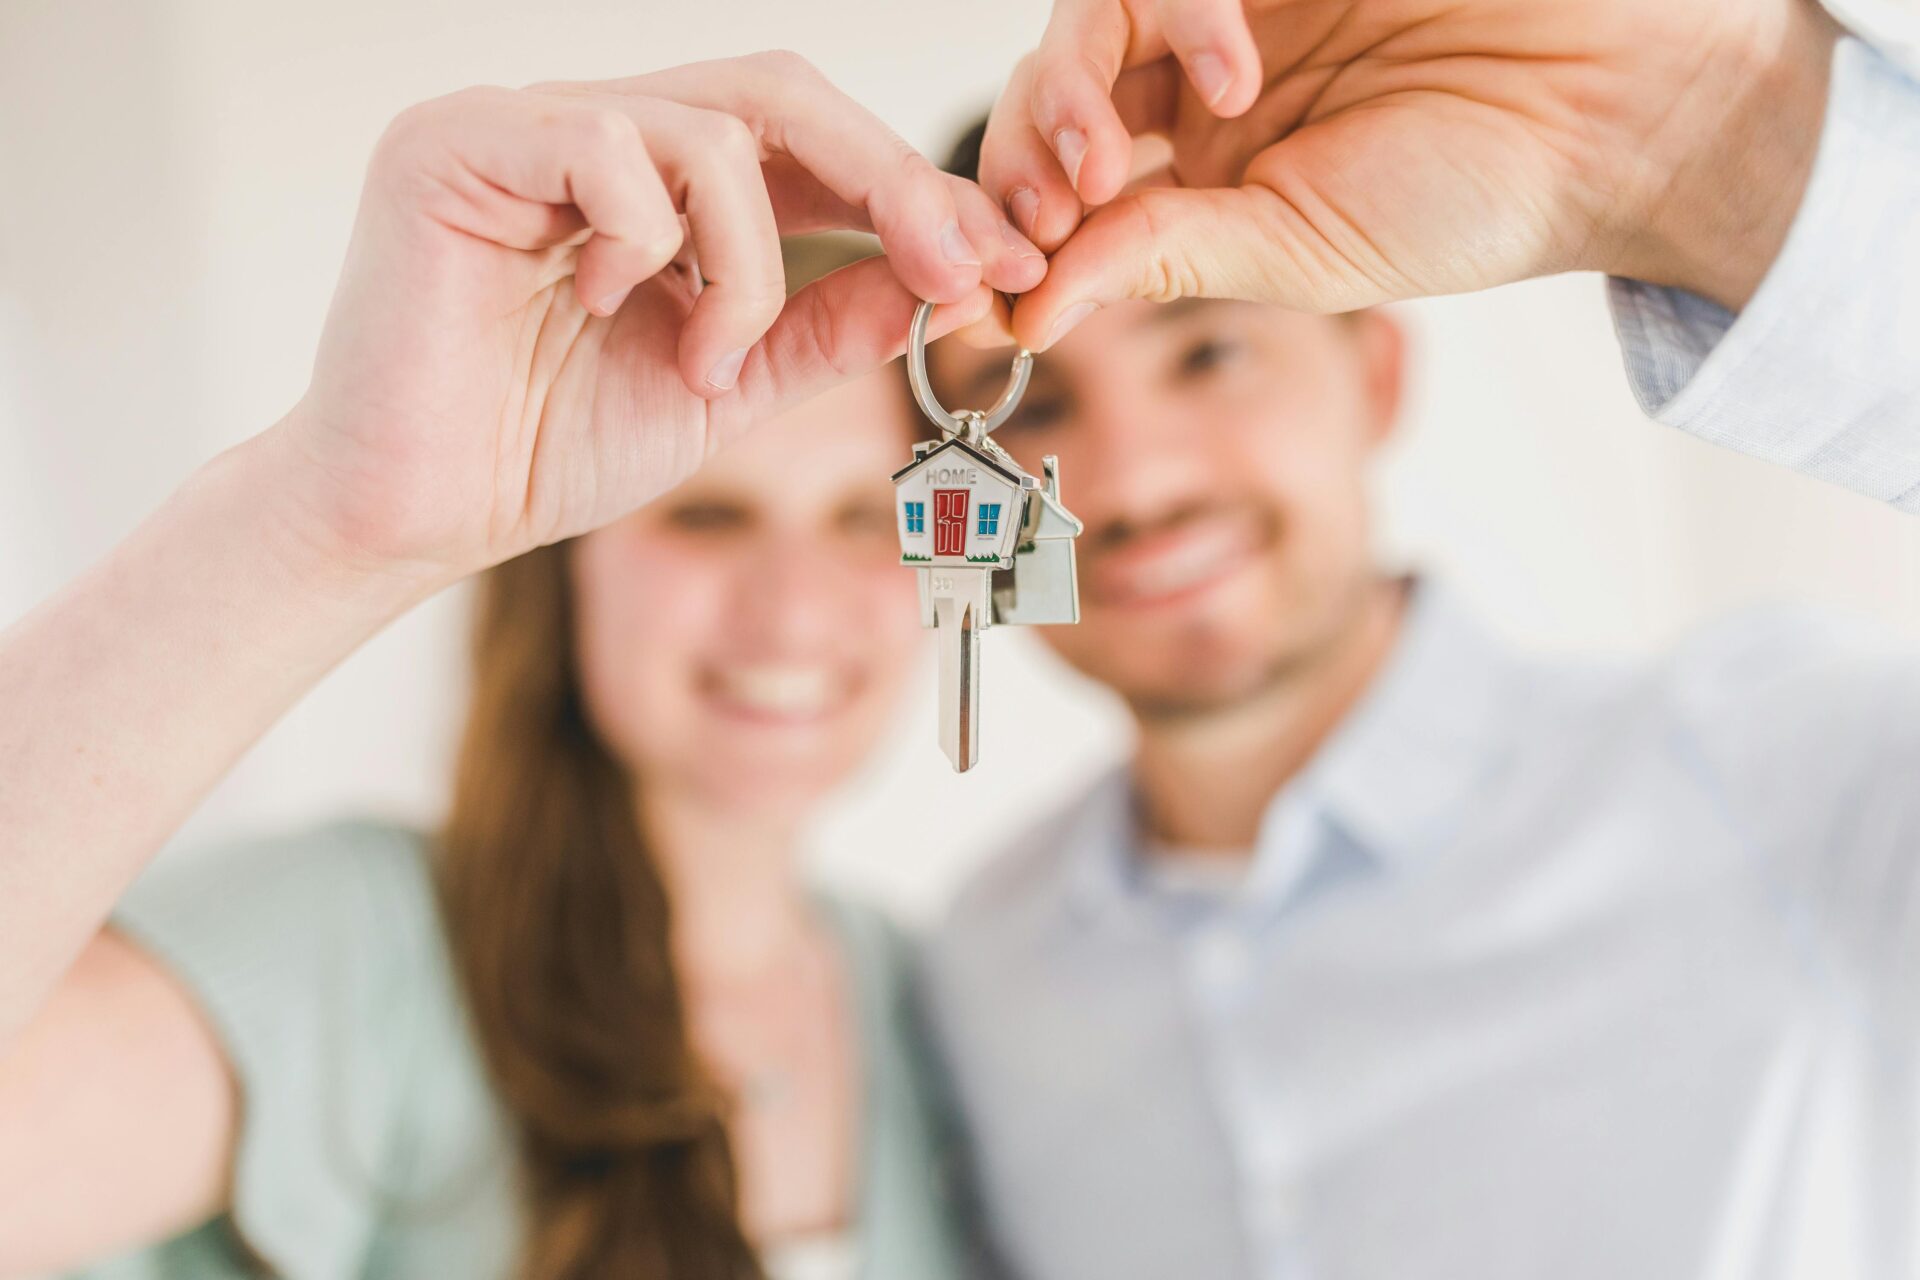 Your Ultimate Guide to Finding Your First Home: Tips for First-Time Buyers